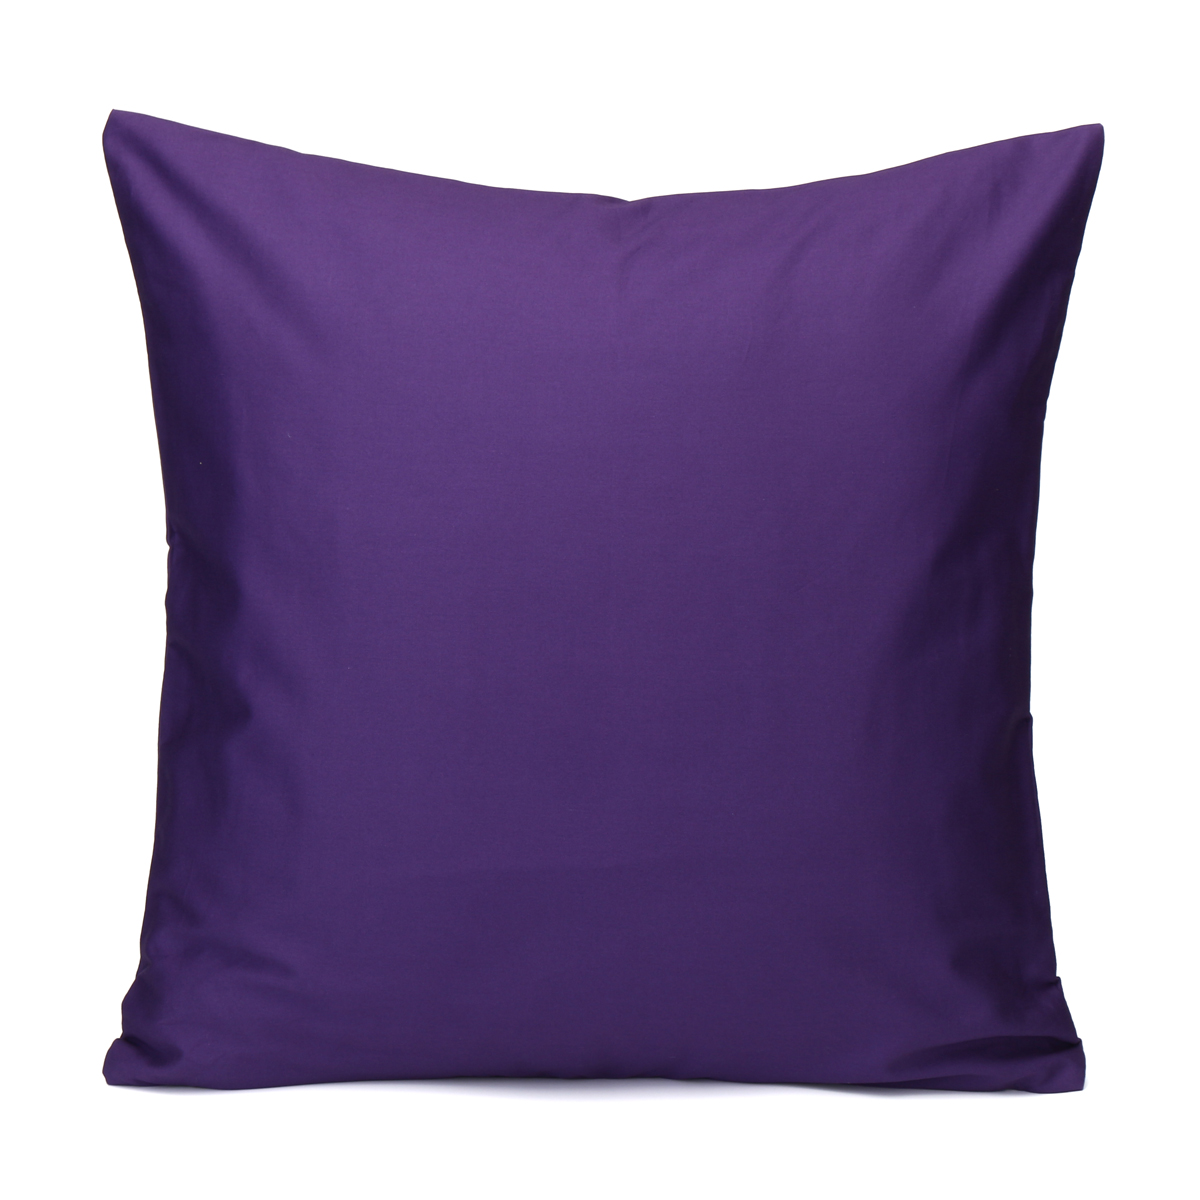 Cotton-Pillow-Case-Solid-Color-Cushion-Cover-Throw-Home-Sofa-Decoration-45X45cm-1579144-6